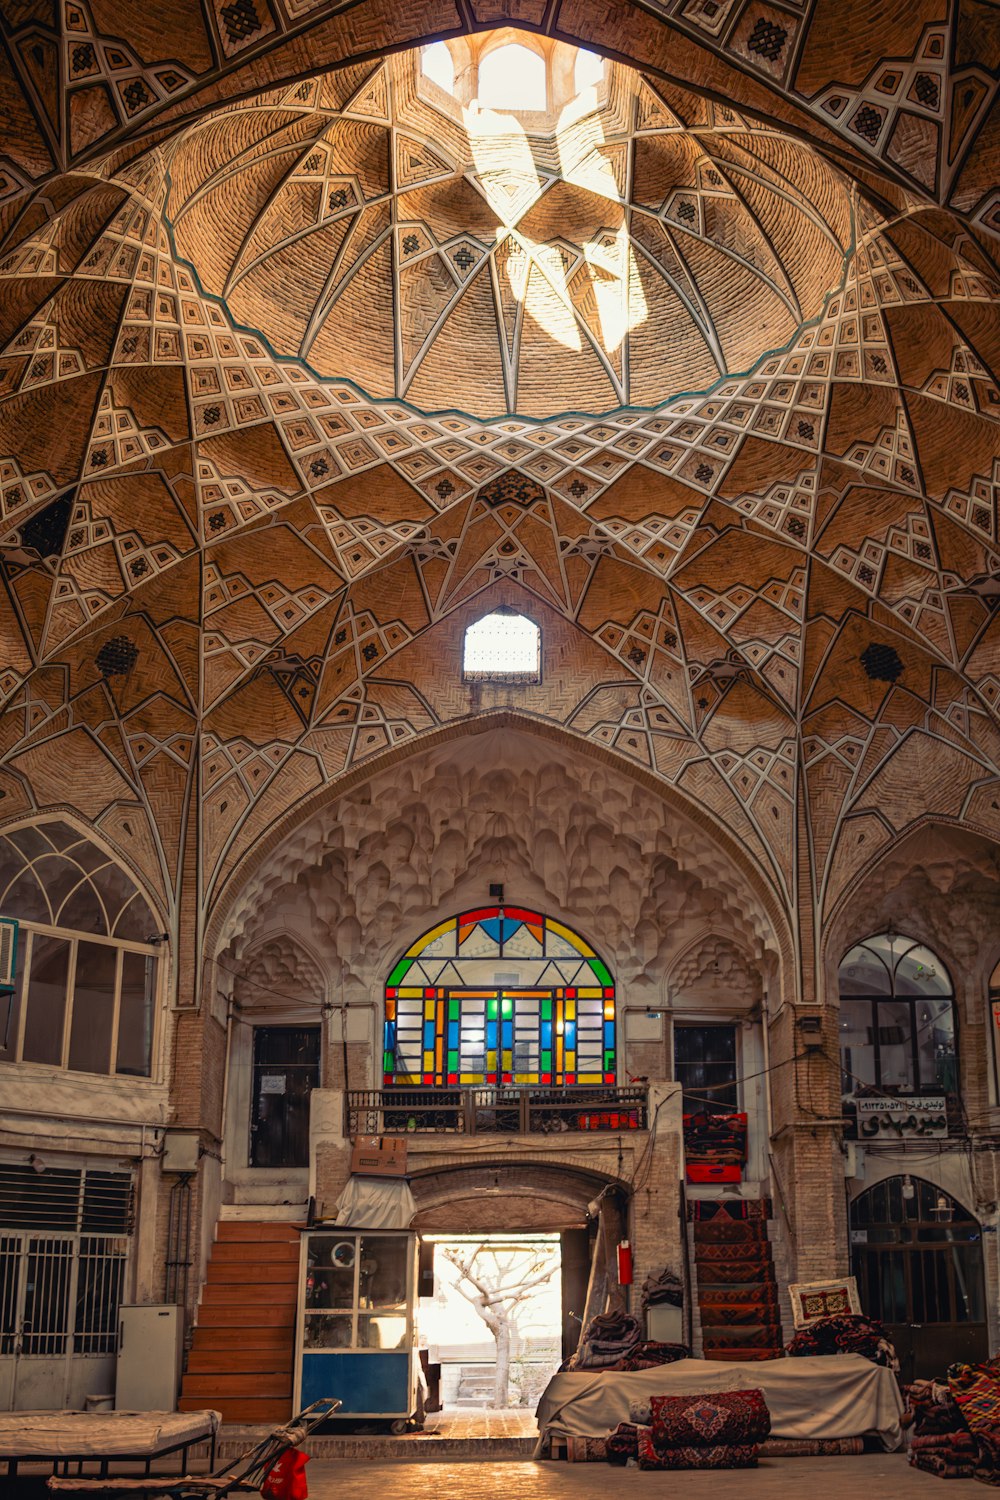 the inside of a building with a large stained glass window